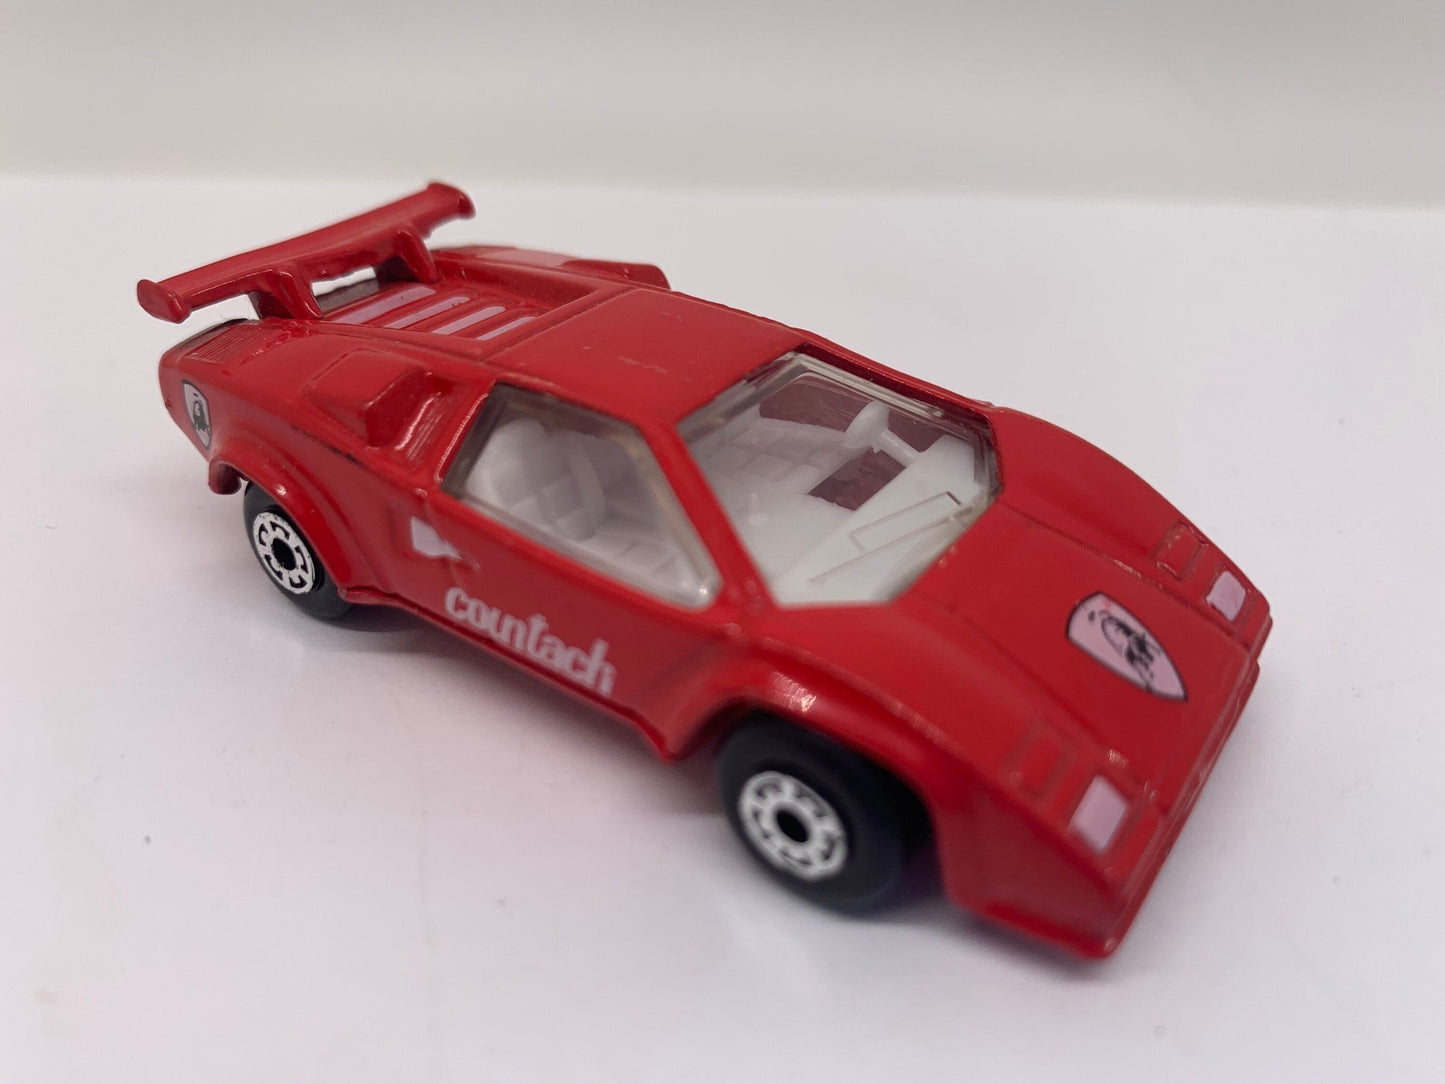 Matchbox Lamborghini Countach LP500S Red Perfect Birthday Gift Miniature Collectable Scale Model Toy Car